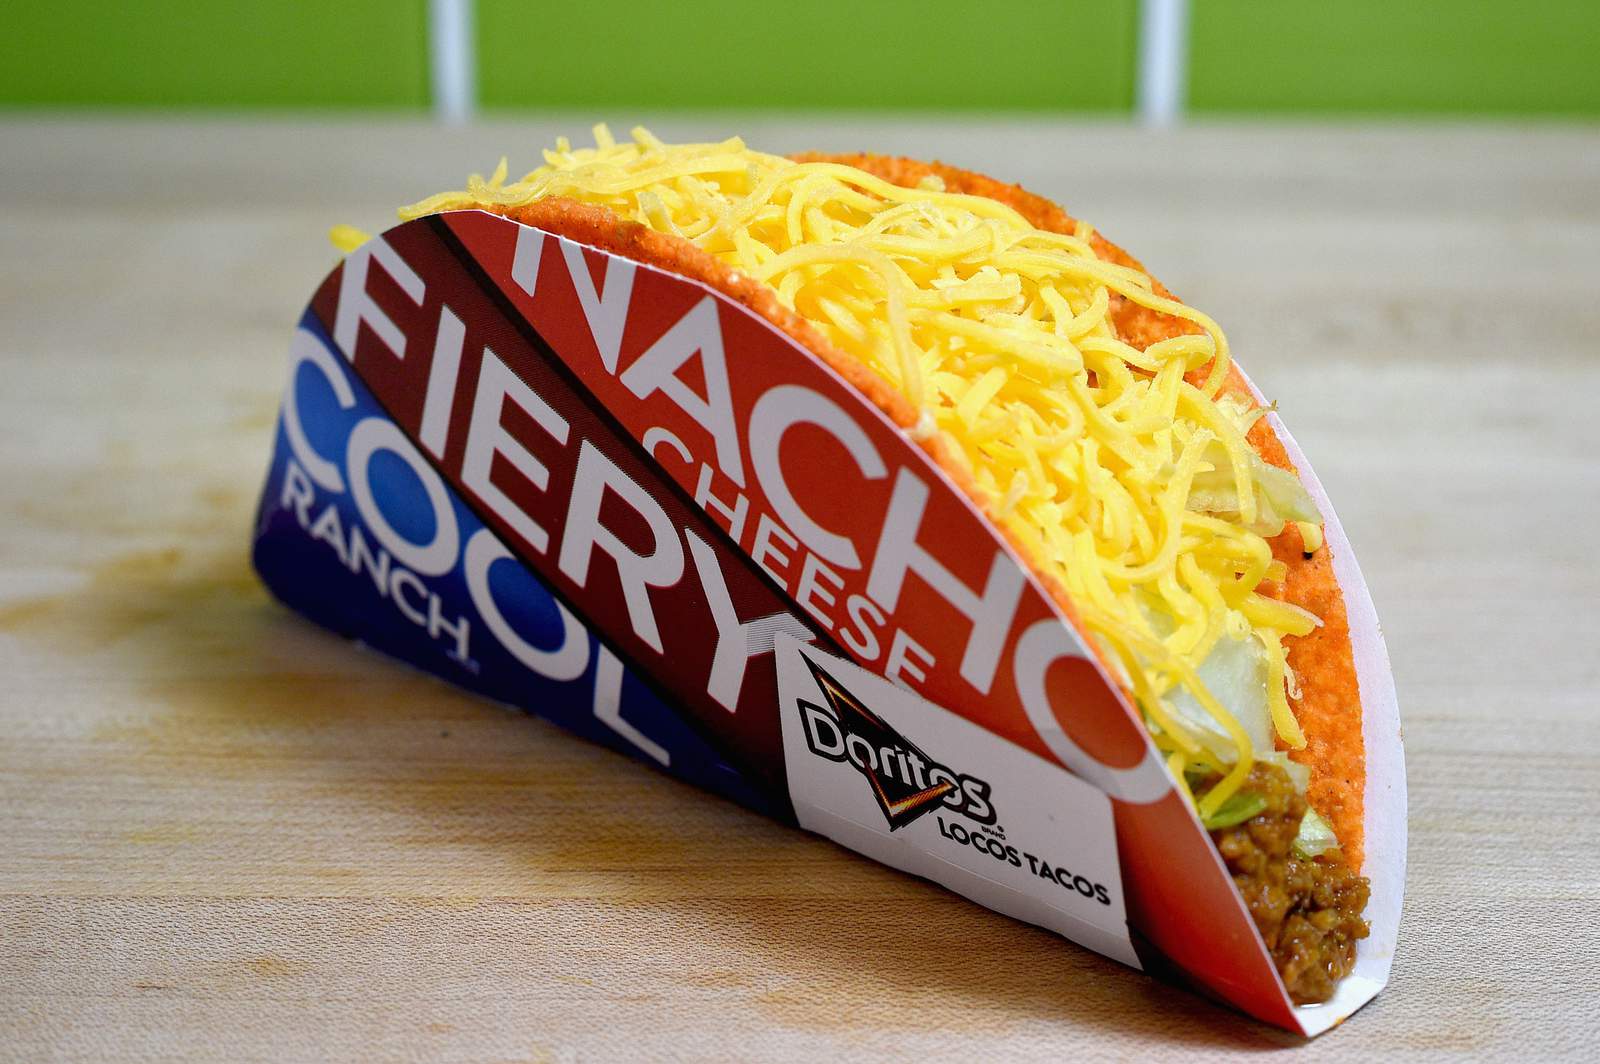 Taco Bell giving away free tacos on Tuesday